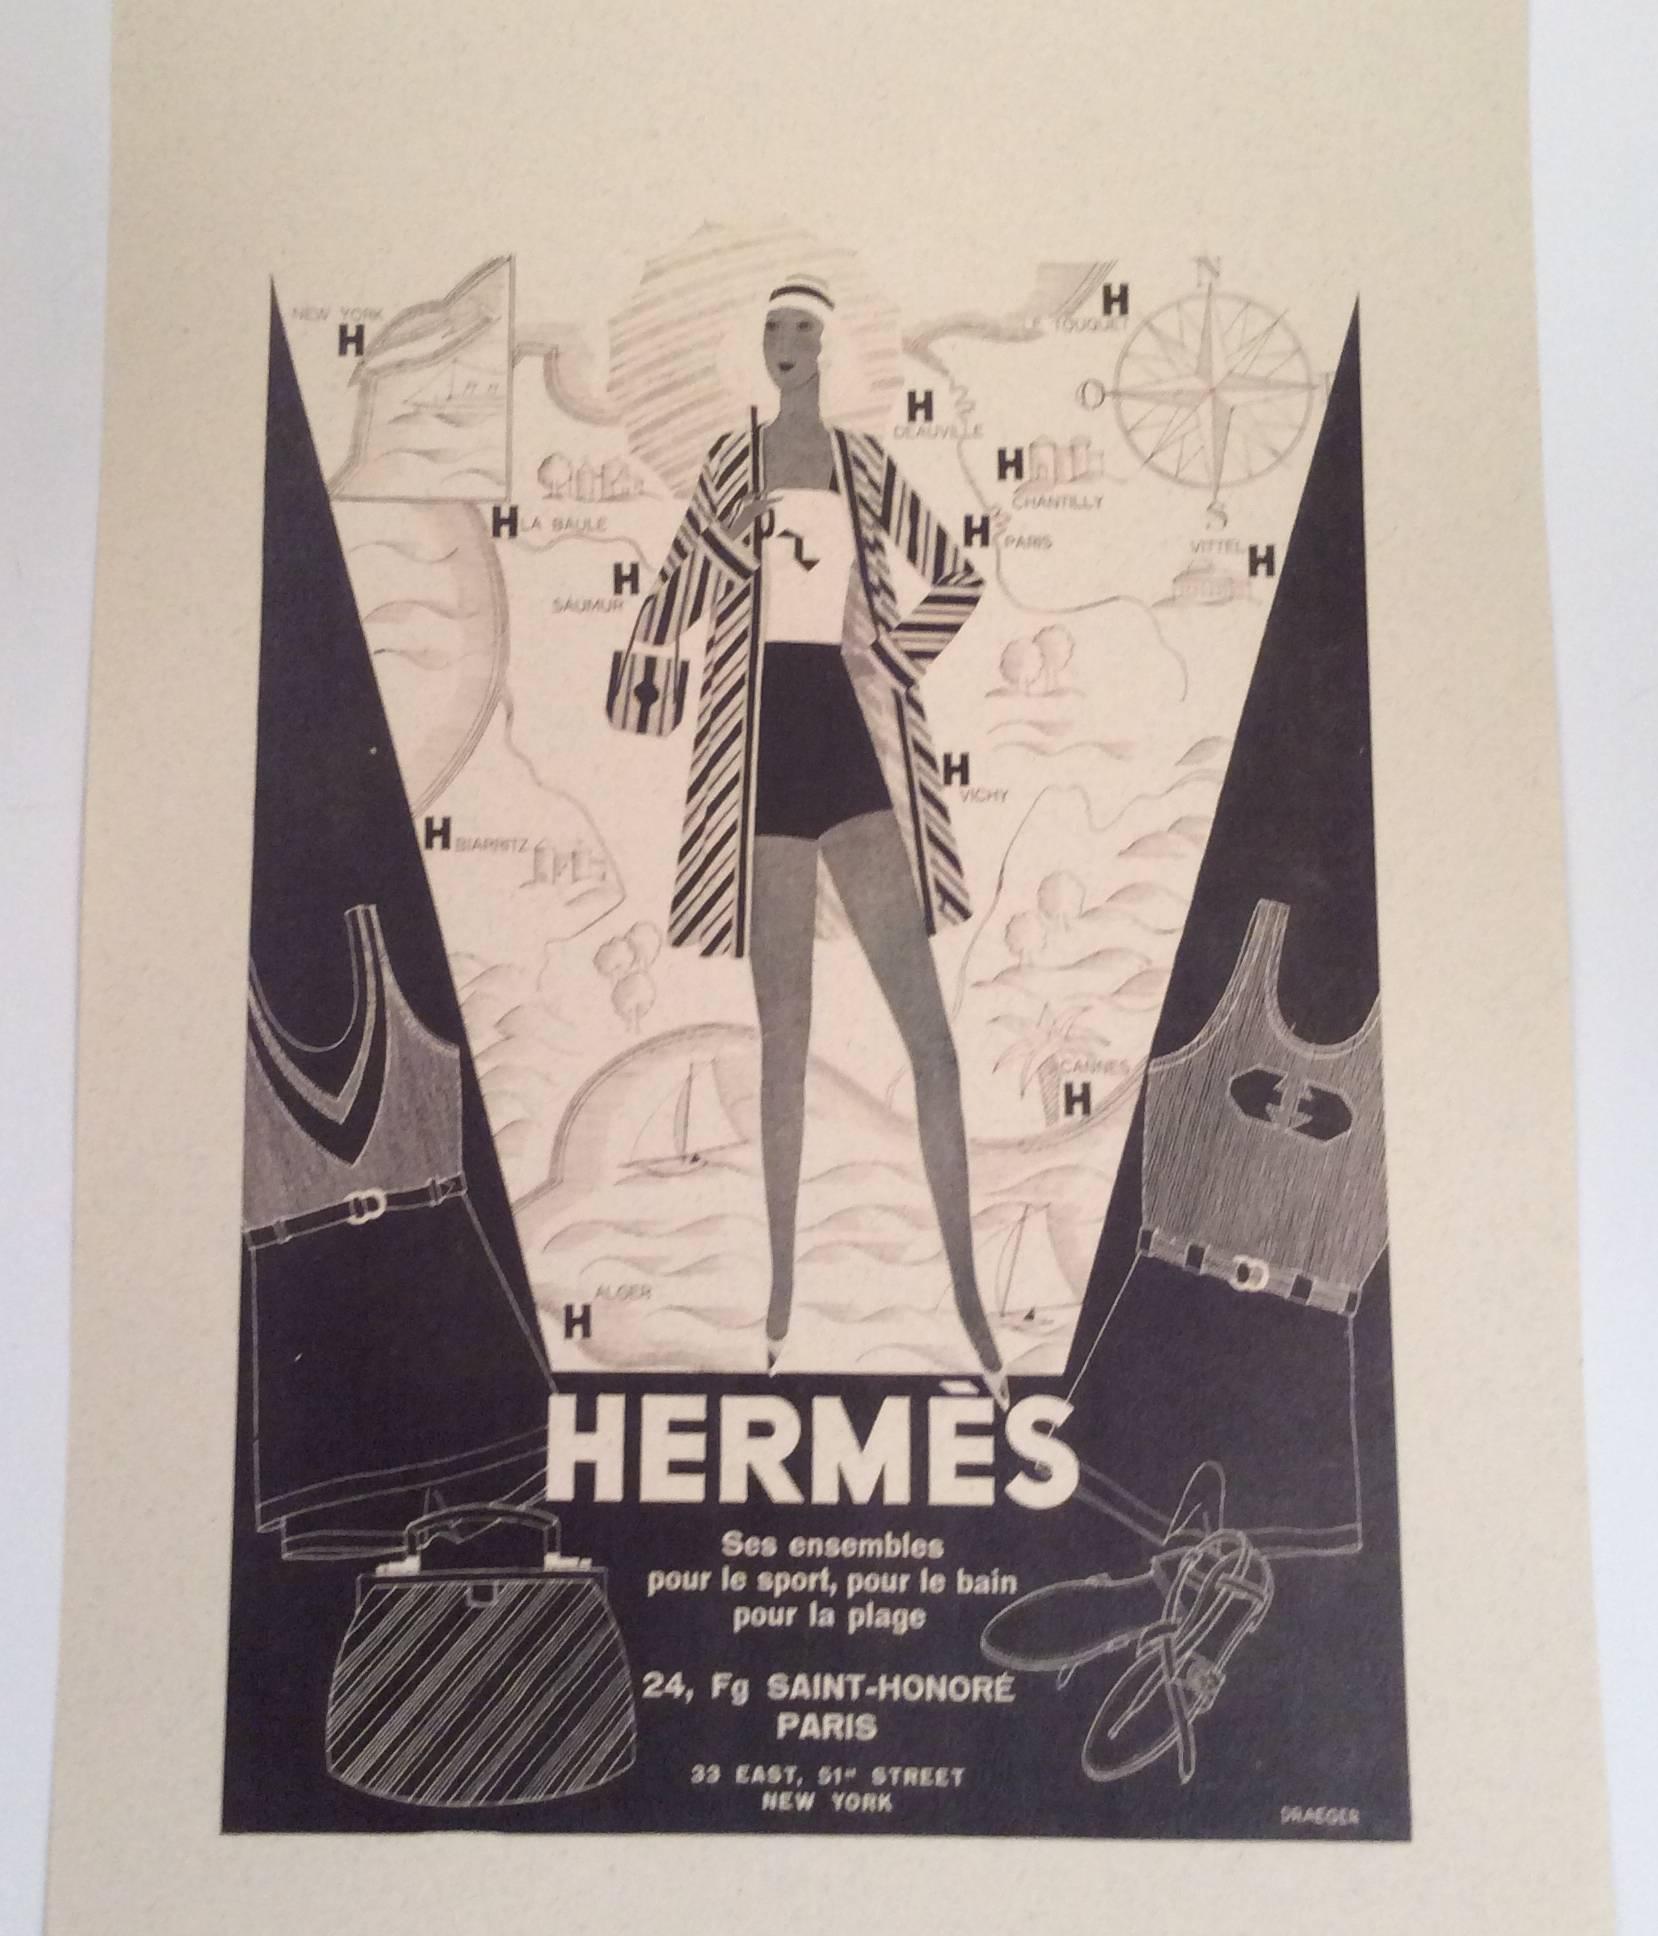 Hermes vintage ad print from the 1930's. These prints were display pieces in store boutiques. This particular image is an Art Deco style image of a woman dressed in a robe and day wear. There is a backdrop of a stylized map and framing the image are